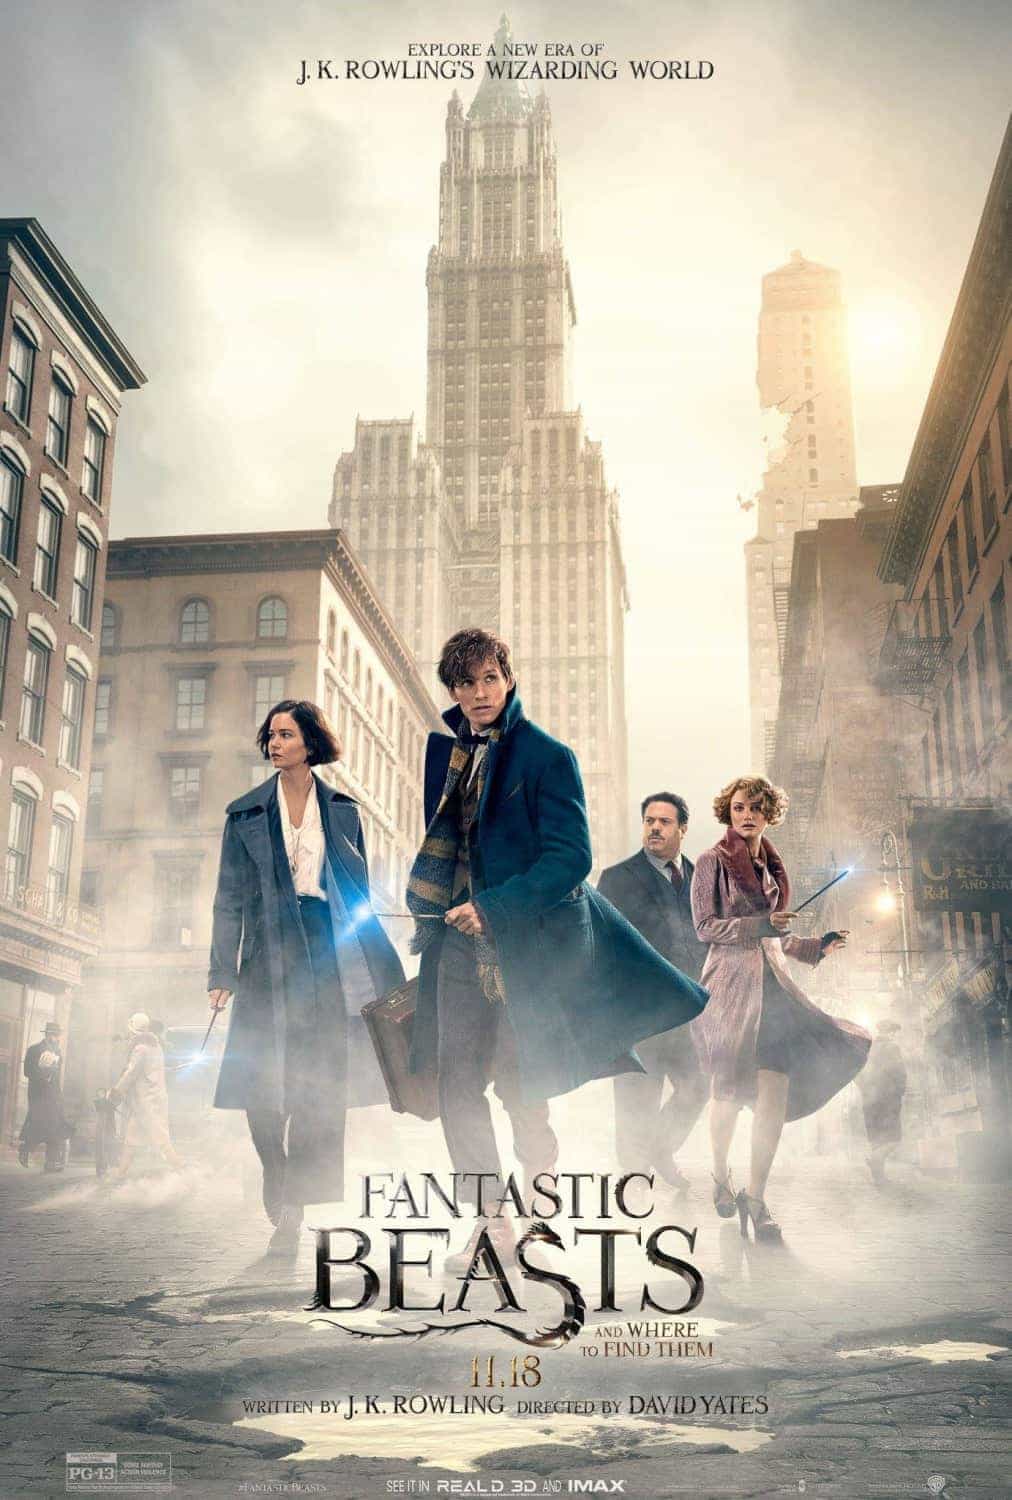 A new interview video with J.K. Rowling introduces Newt Scamander from Fantastic Beasts and Where to Find Them film release date 18th November